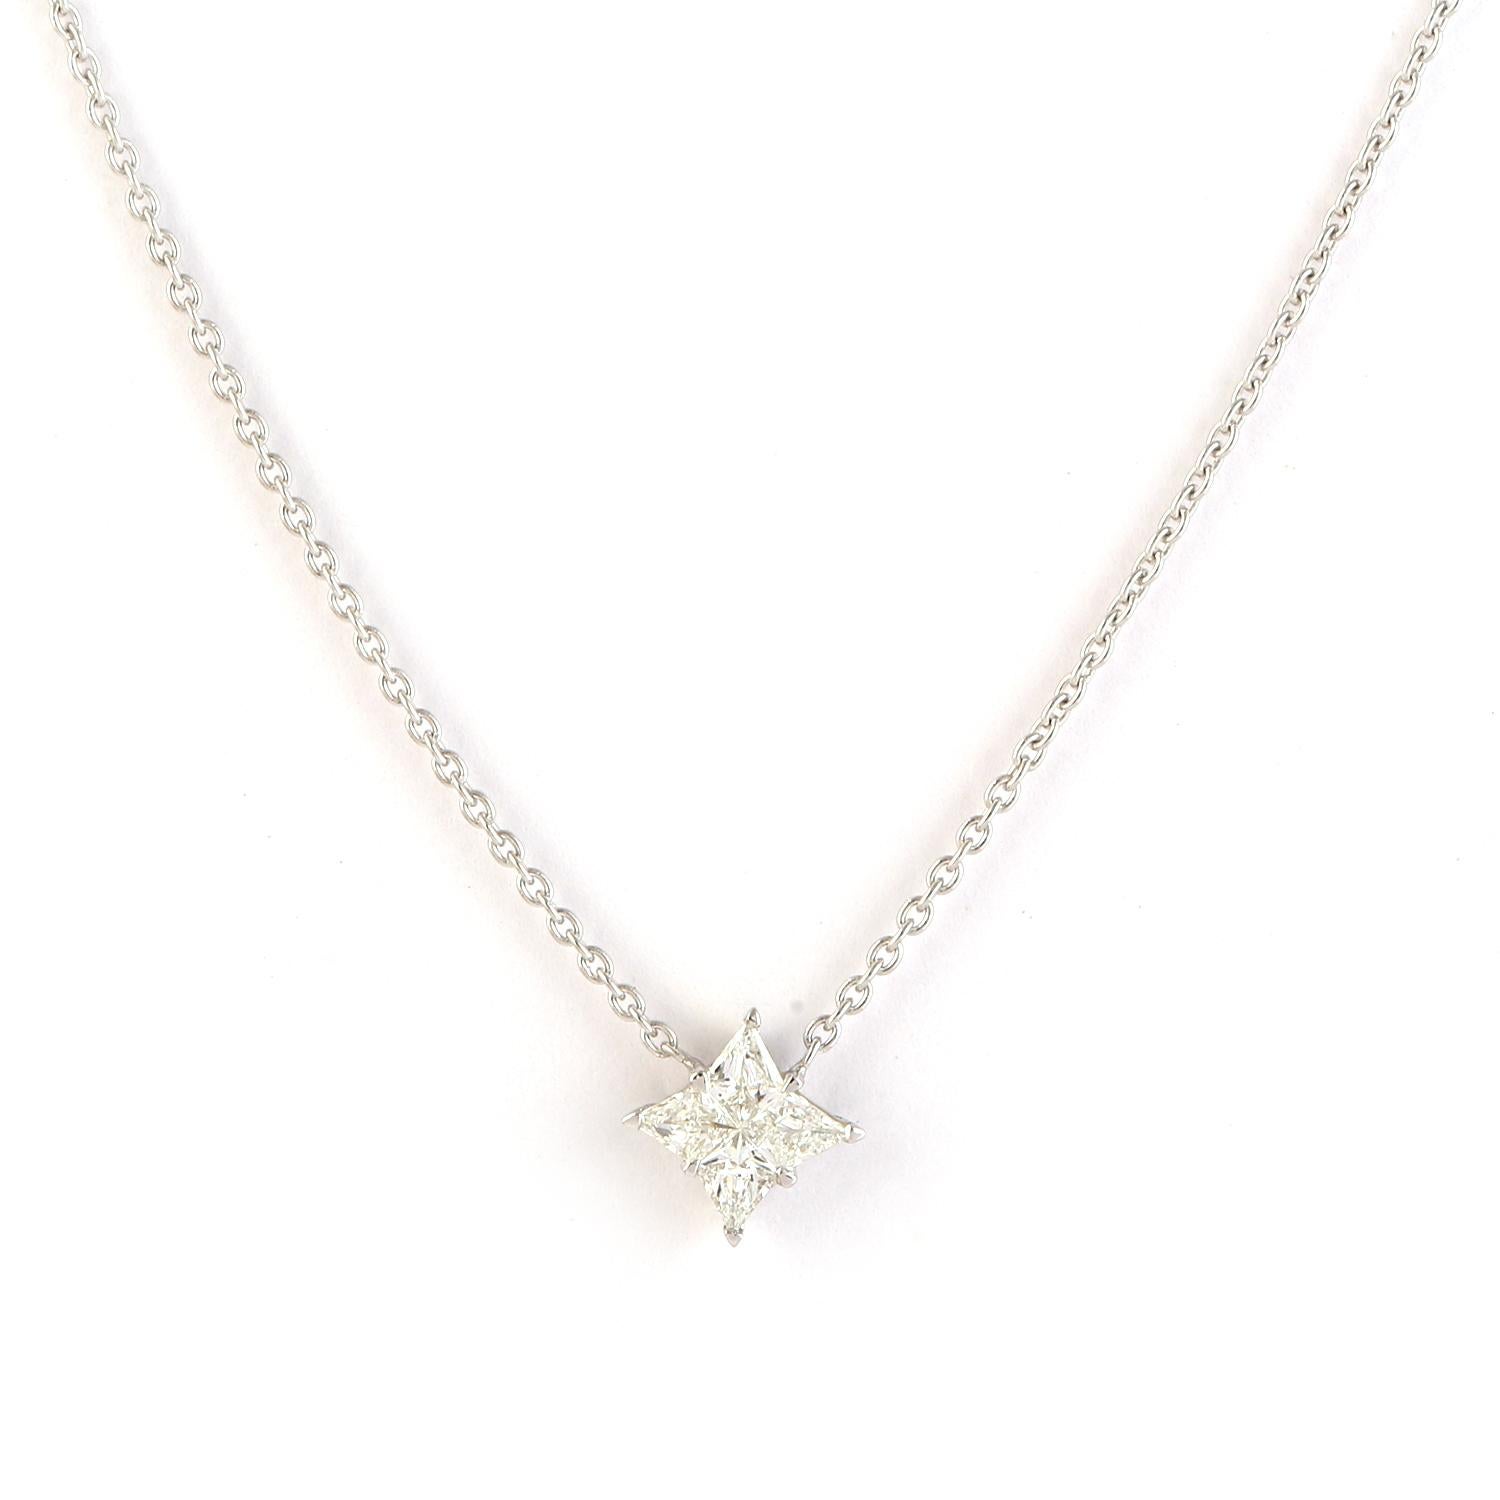 Indulge in the luxury of this stunning necklace made with 18k white gold and featuring a dazzling diamond-studded star pendant. The pendant sparkles with a brilliant array of diamonds, catching the light with every movement. The delicate chain is